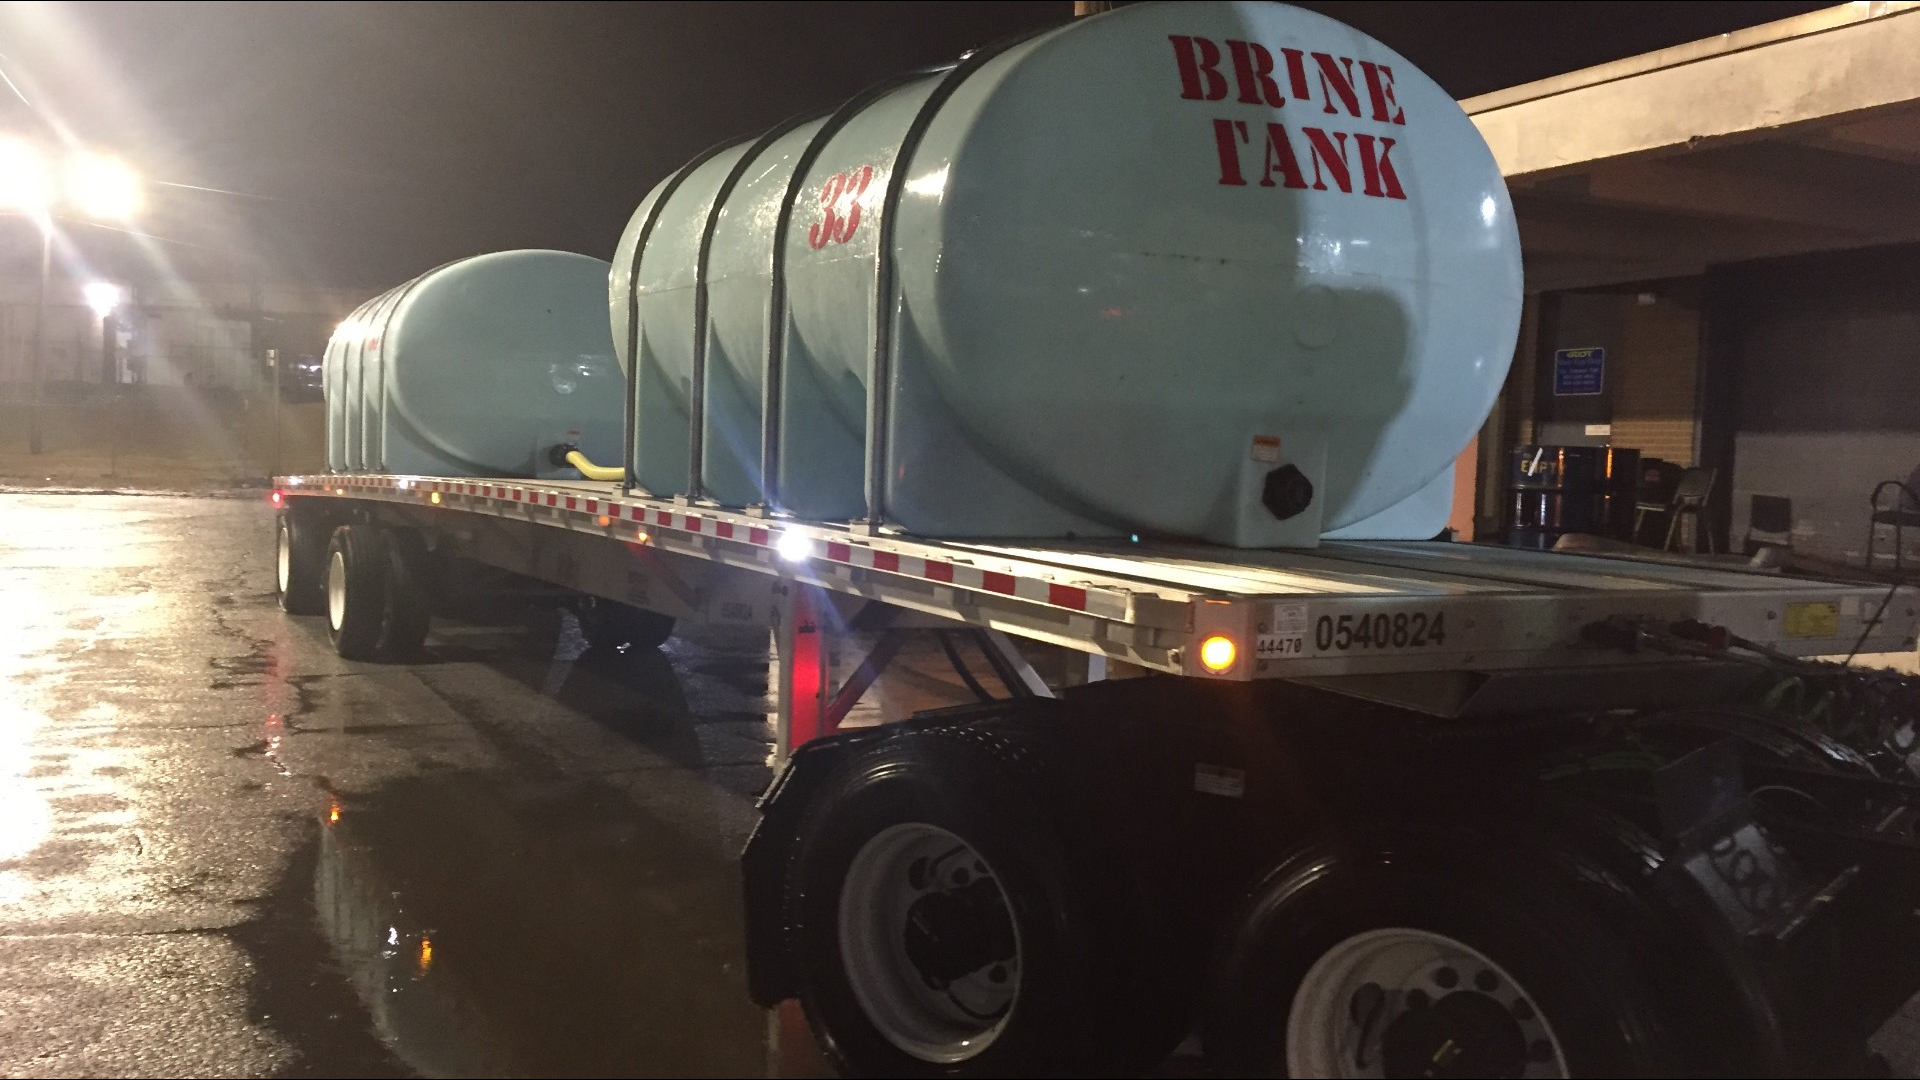 Brine tanks were used to place the solution on the roads